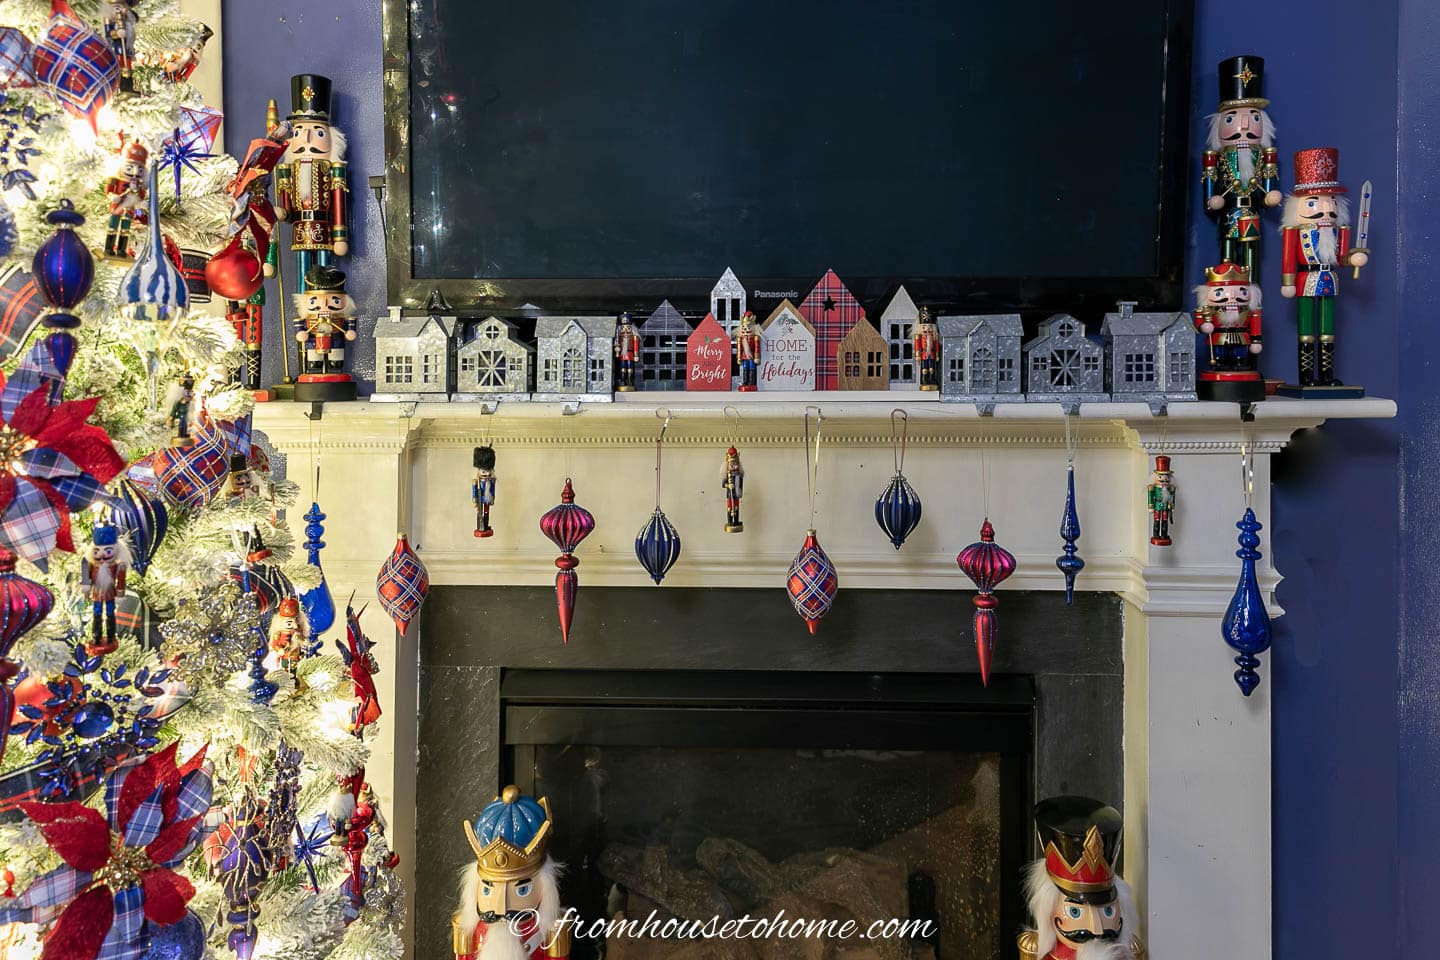 Fireplace mantel decorated with nutcrackers and red and blue ornaments